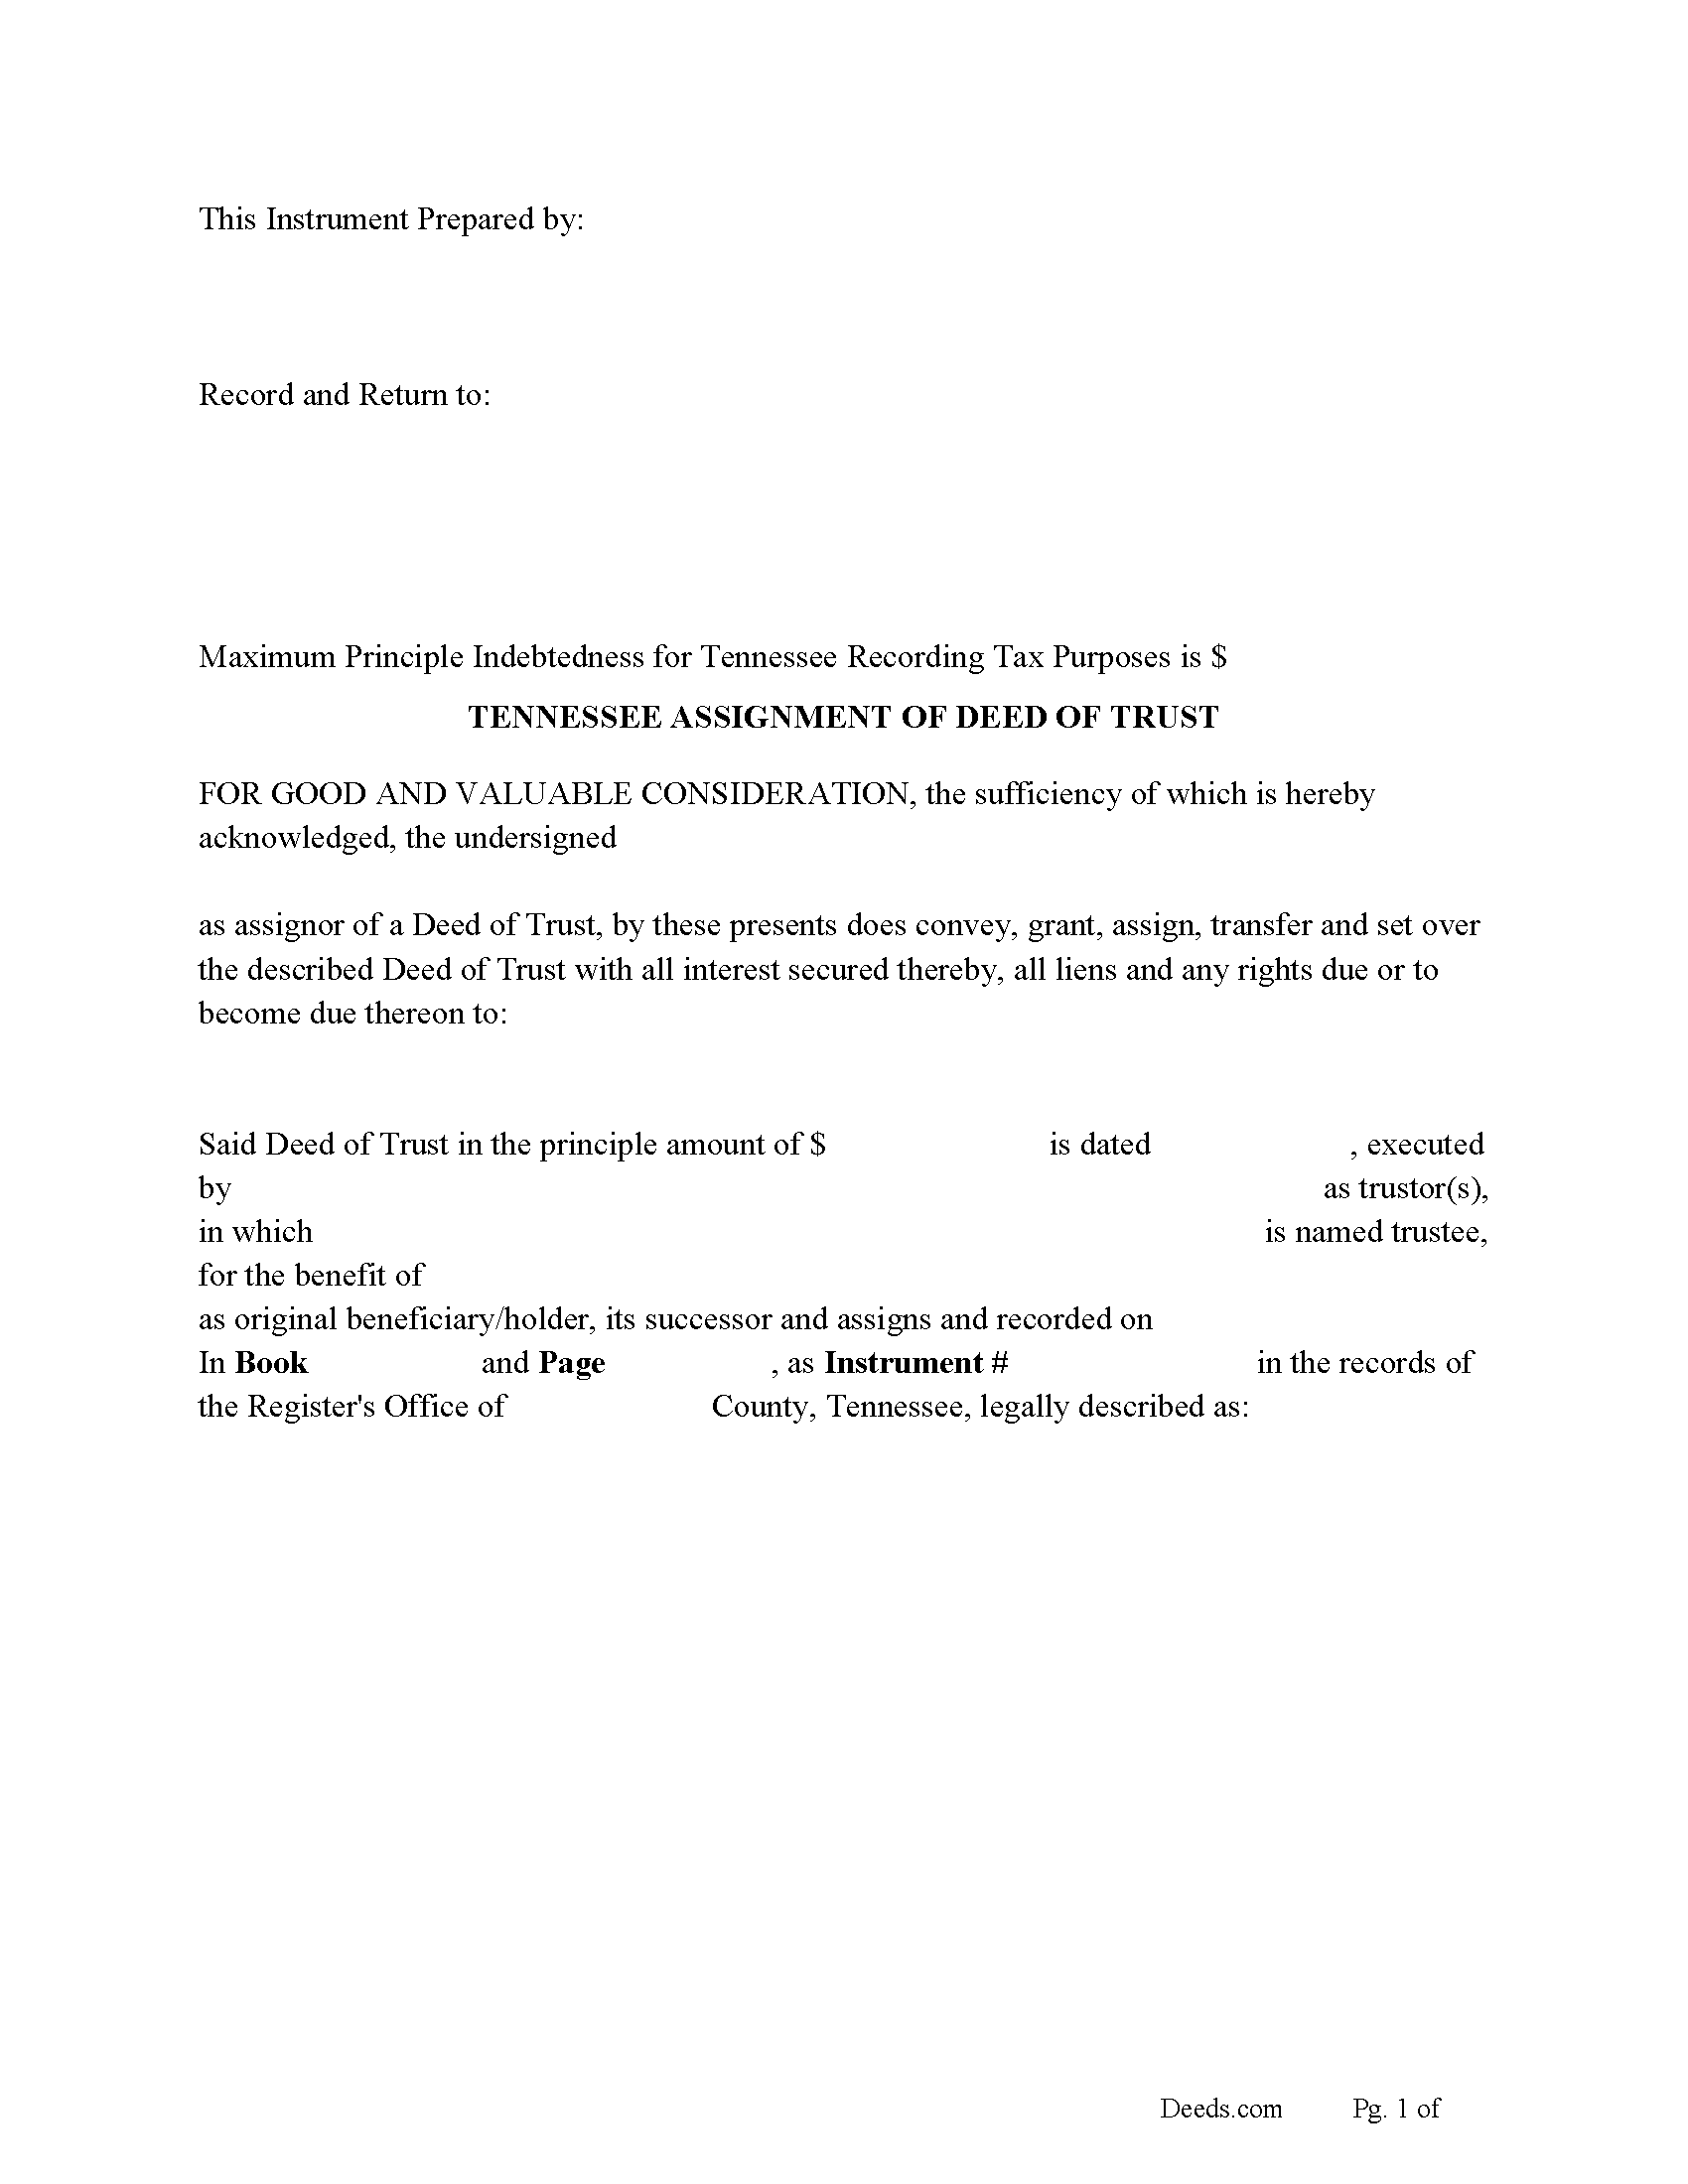 Tennessee Assignment of Deed of Trust Image